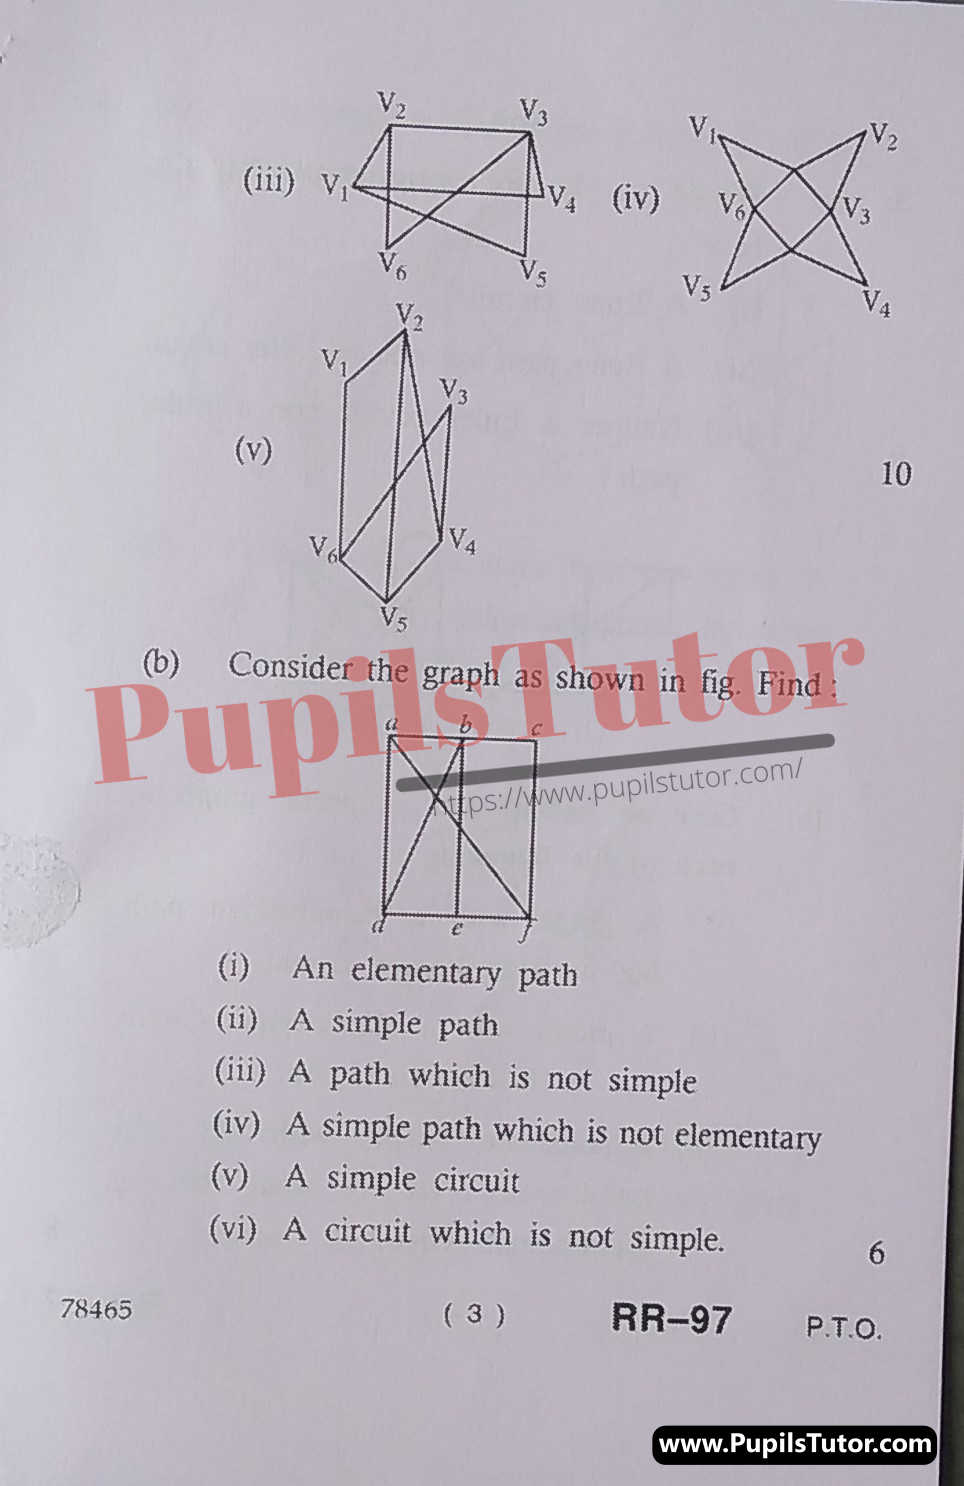 Free Download PDF Of M.D. University M.Sc. [Mathematics] Fourth Semester Latest Question Paper For Graph Theory Subject (Page 3) - https://www.pupilstutor.com